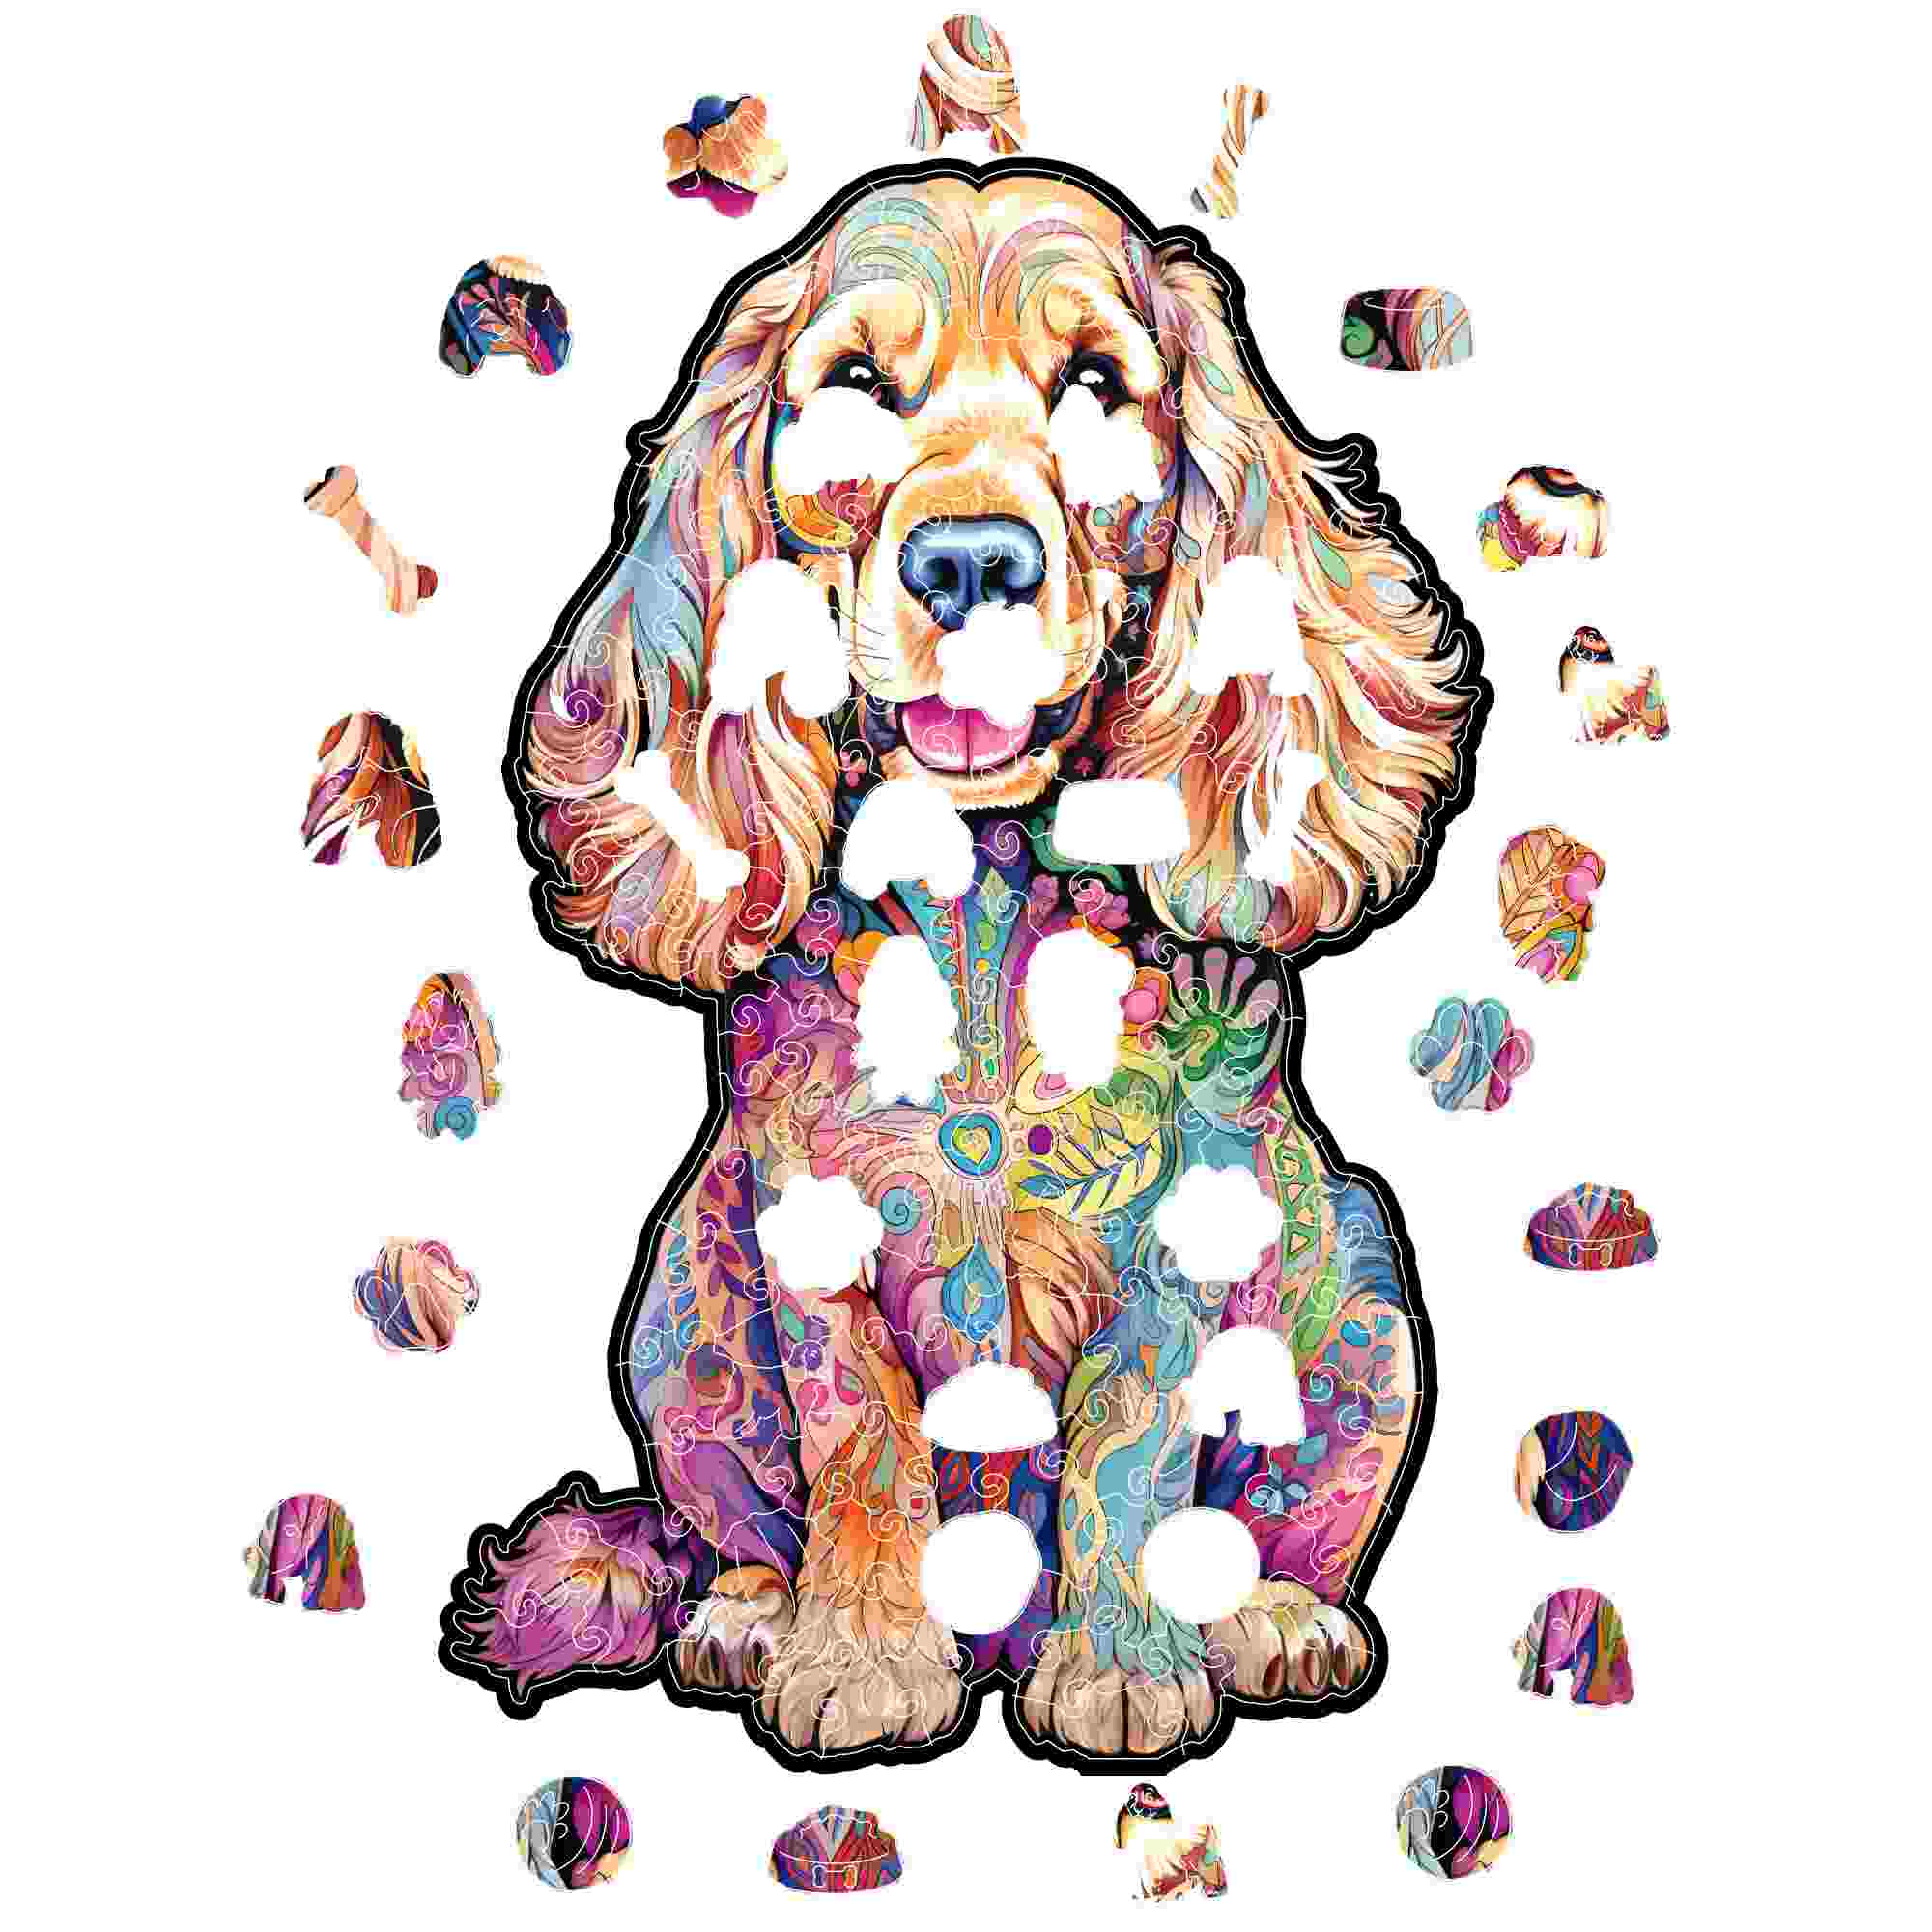 Animal Jigsaw Puzzle > Wooden Jigsaw Puzzle > Jigsaw Puzzle Cocker Spaniel - Jigsaw Puzzle